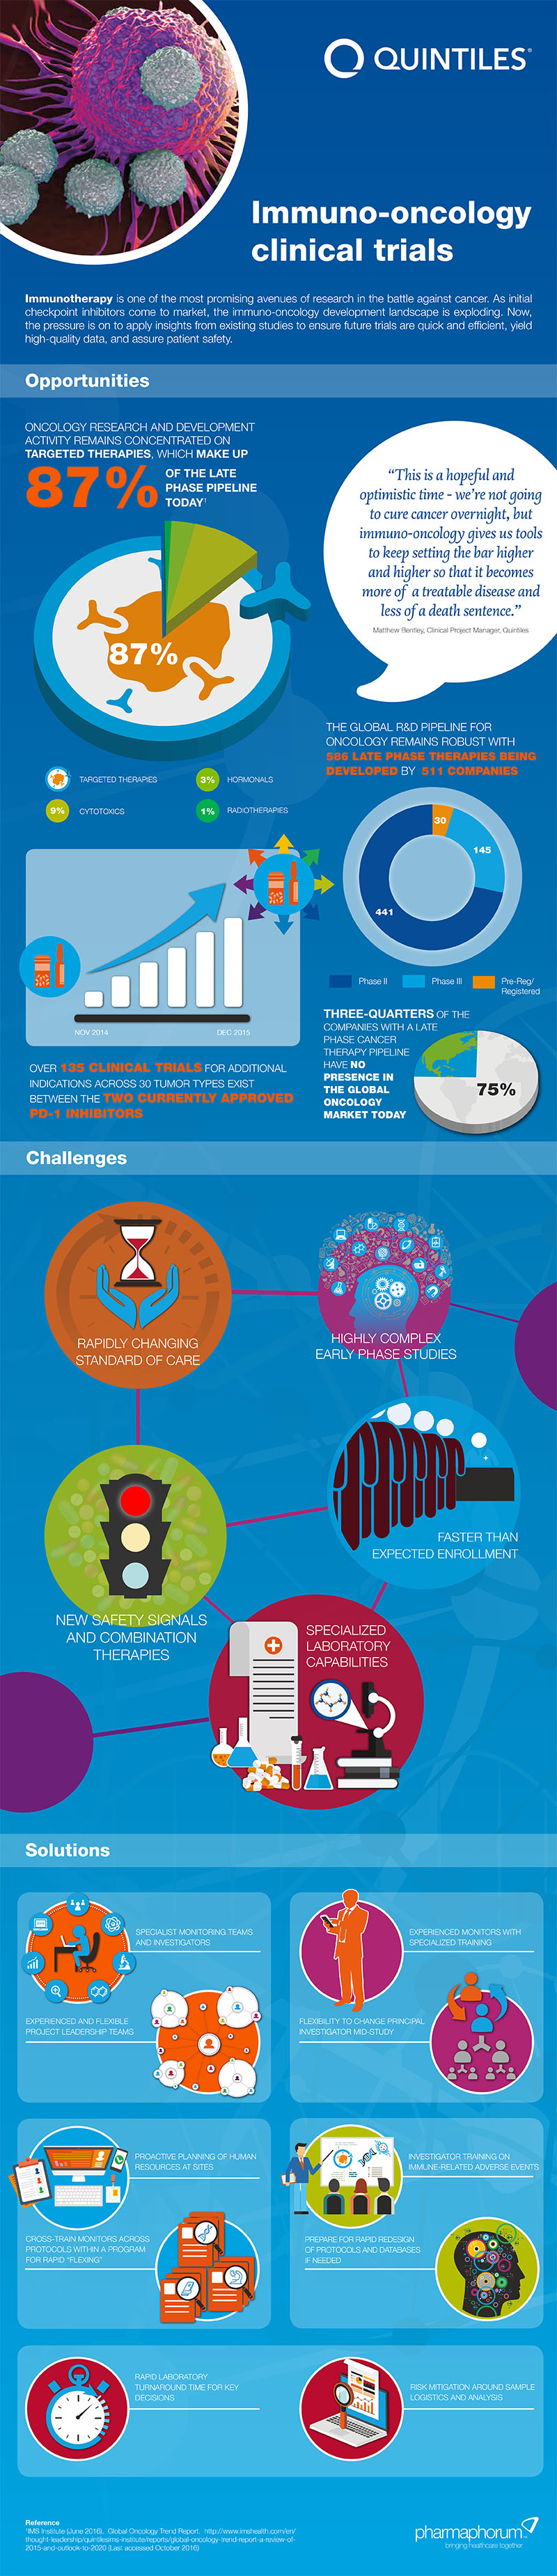 quintiles-infographic-oct2016-10_10_2016-final